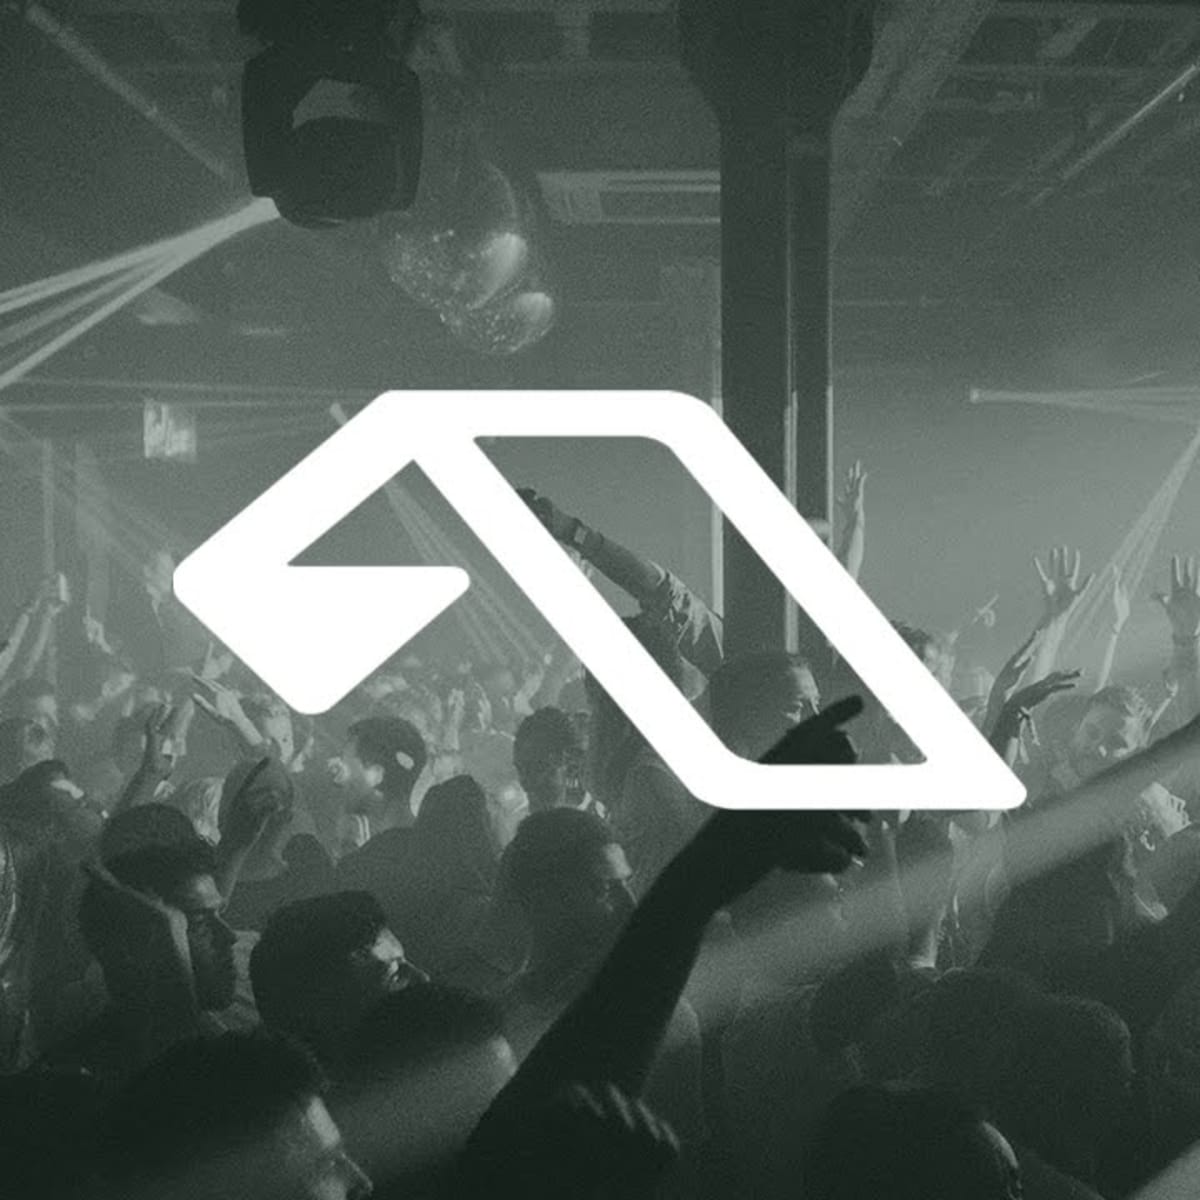 Anjunabeats and Twitch Announce Partnership with Special Live